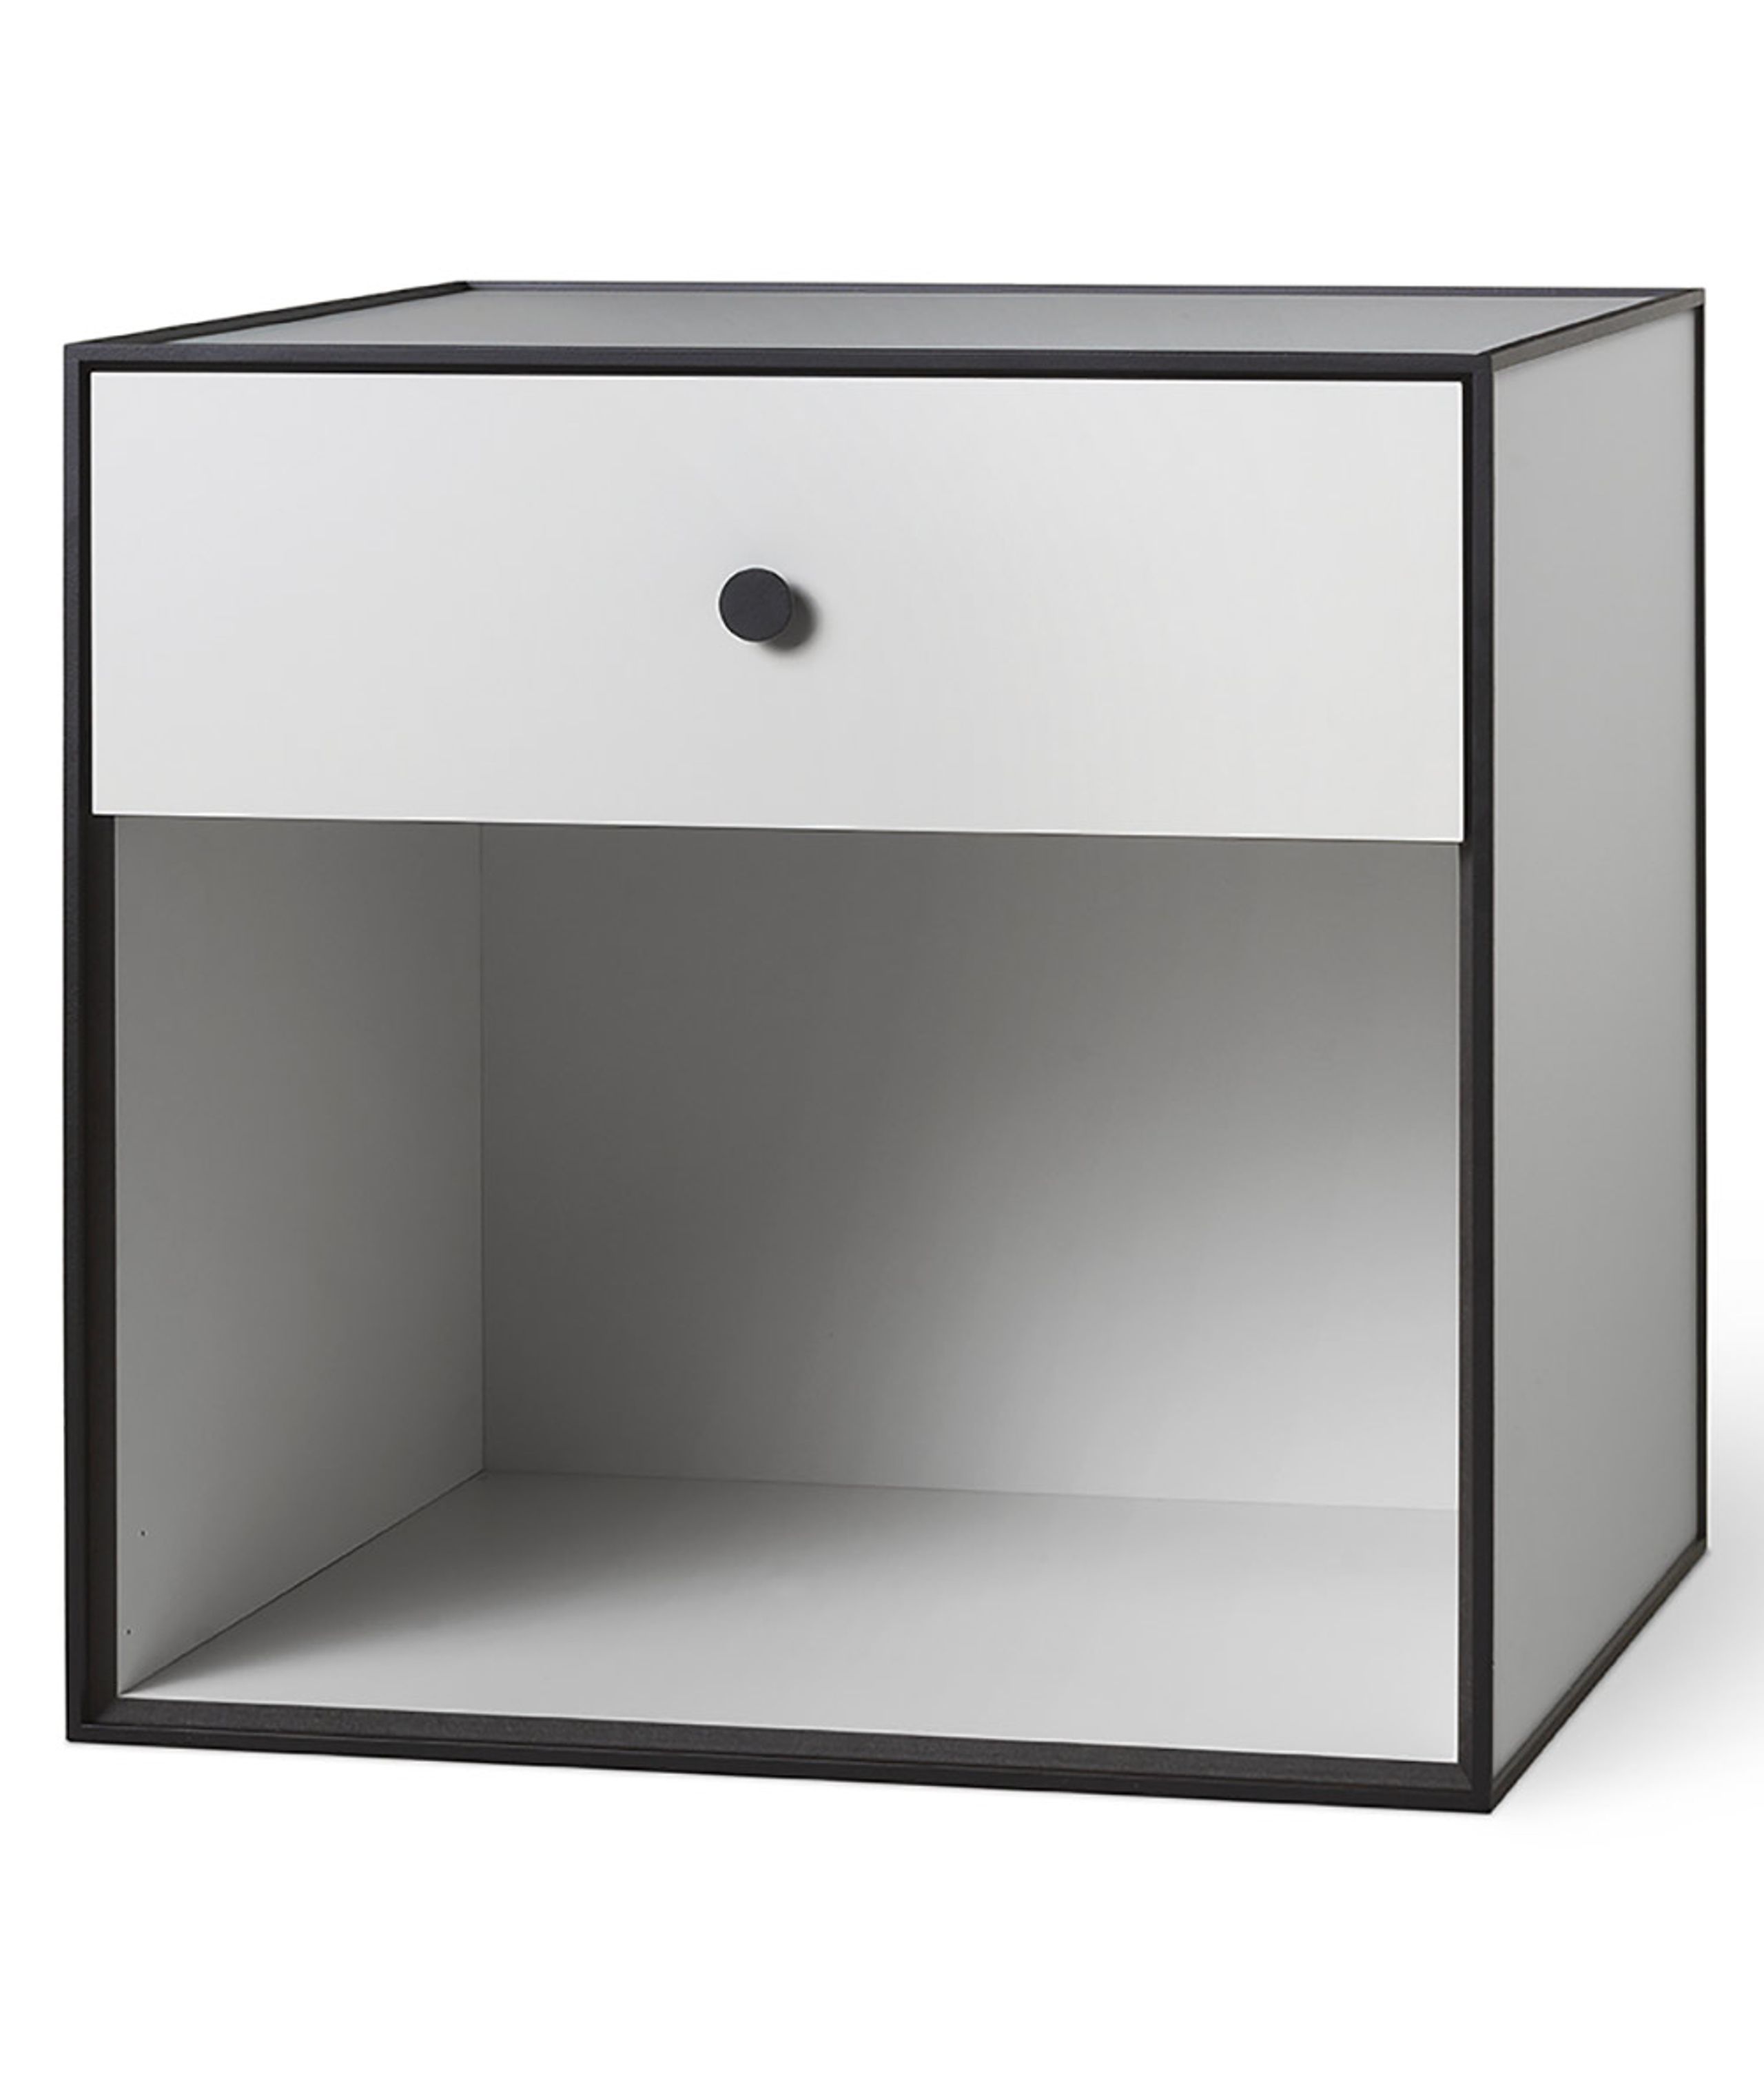 By Lassen - Étagère - Frame 49 with drawers - Light Grey - 1 drawer